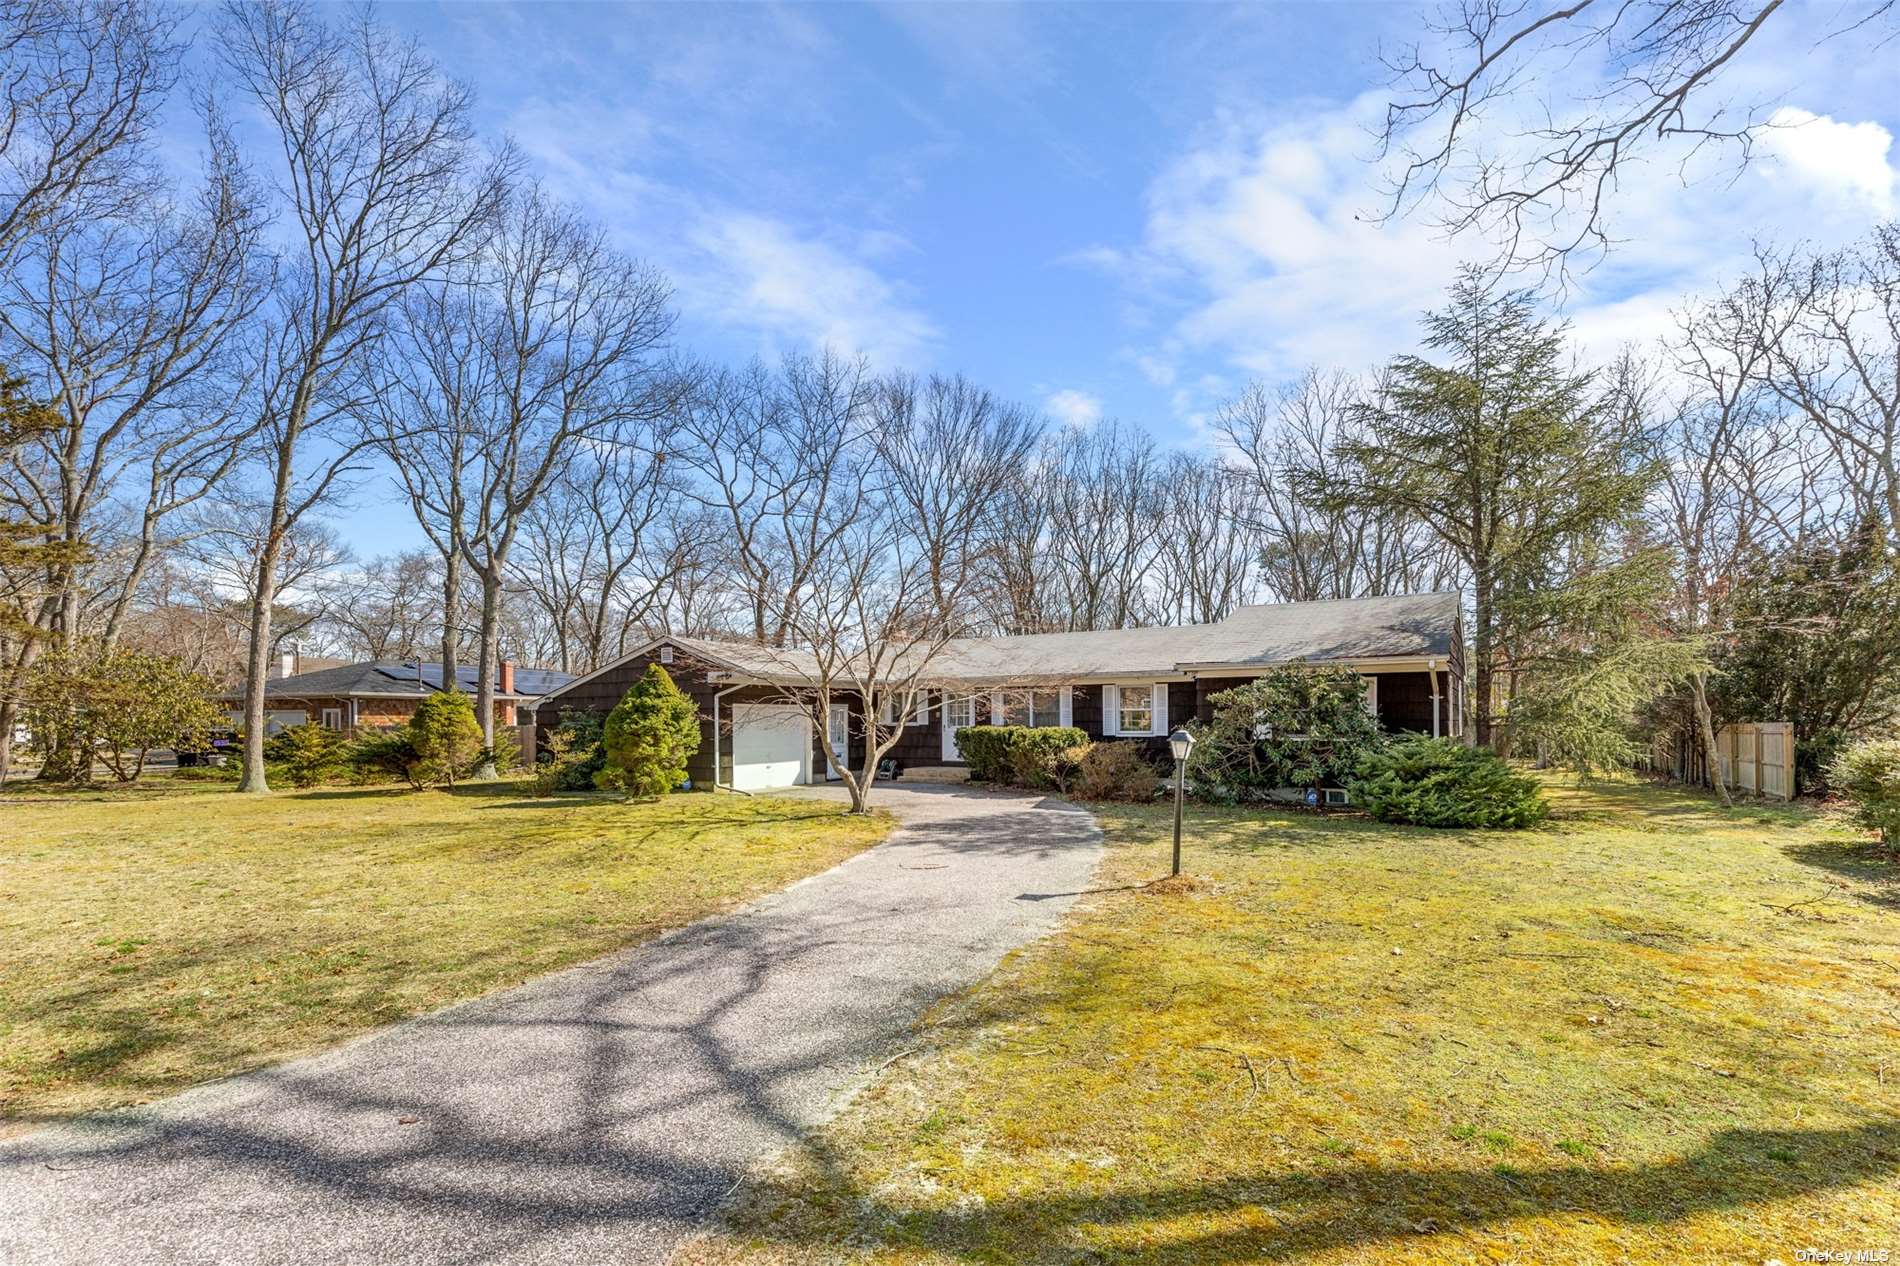 View East Quogue, NY 11942 house